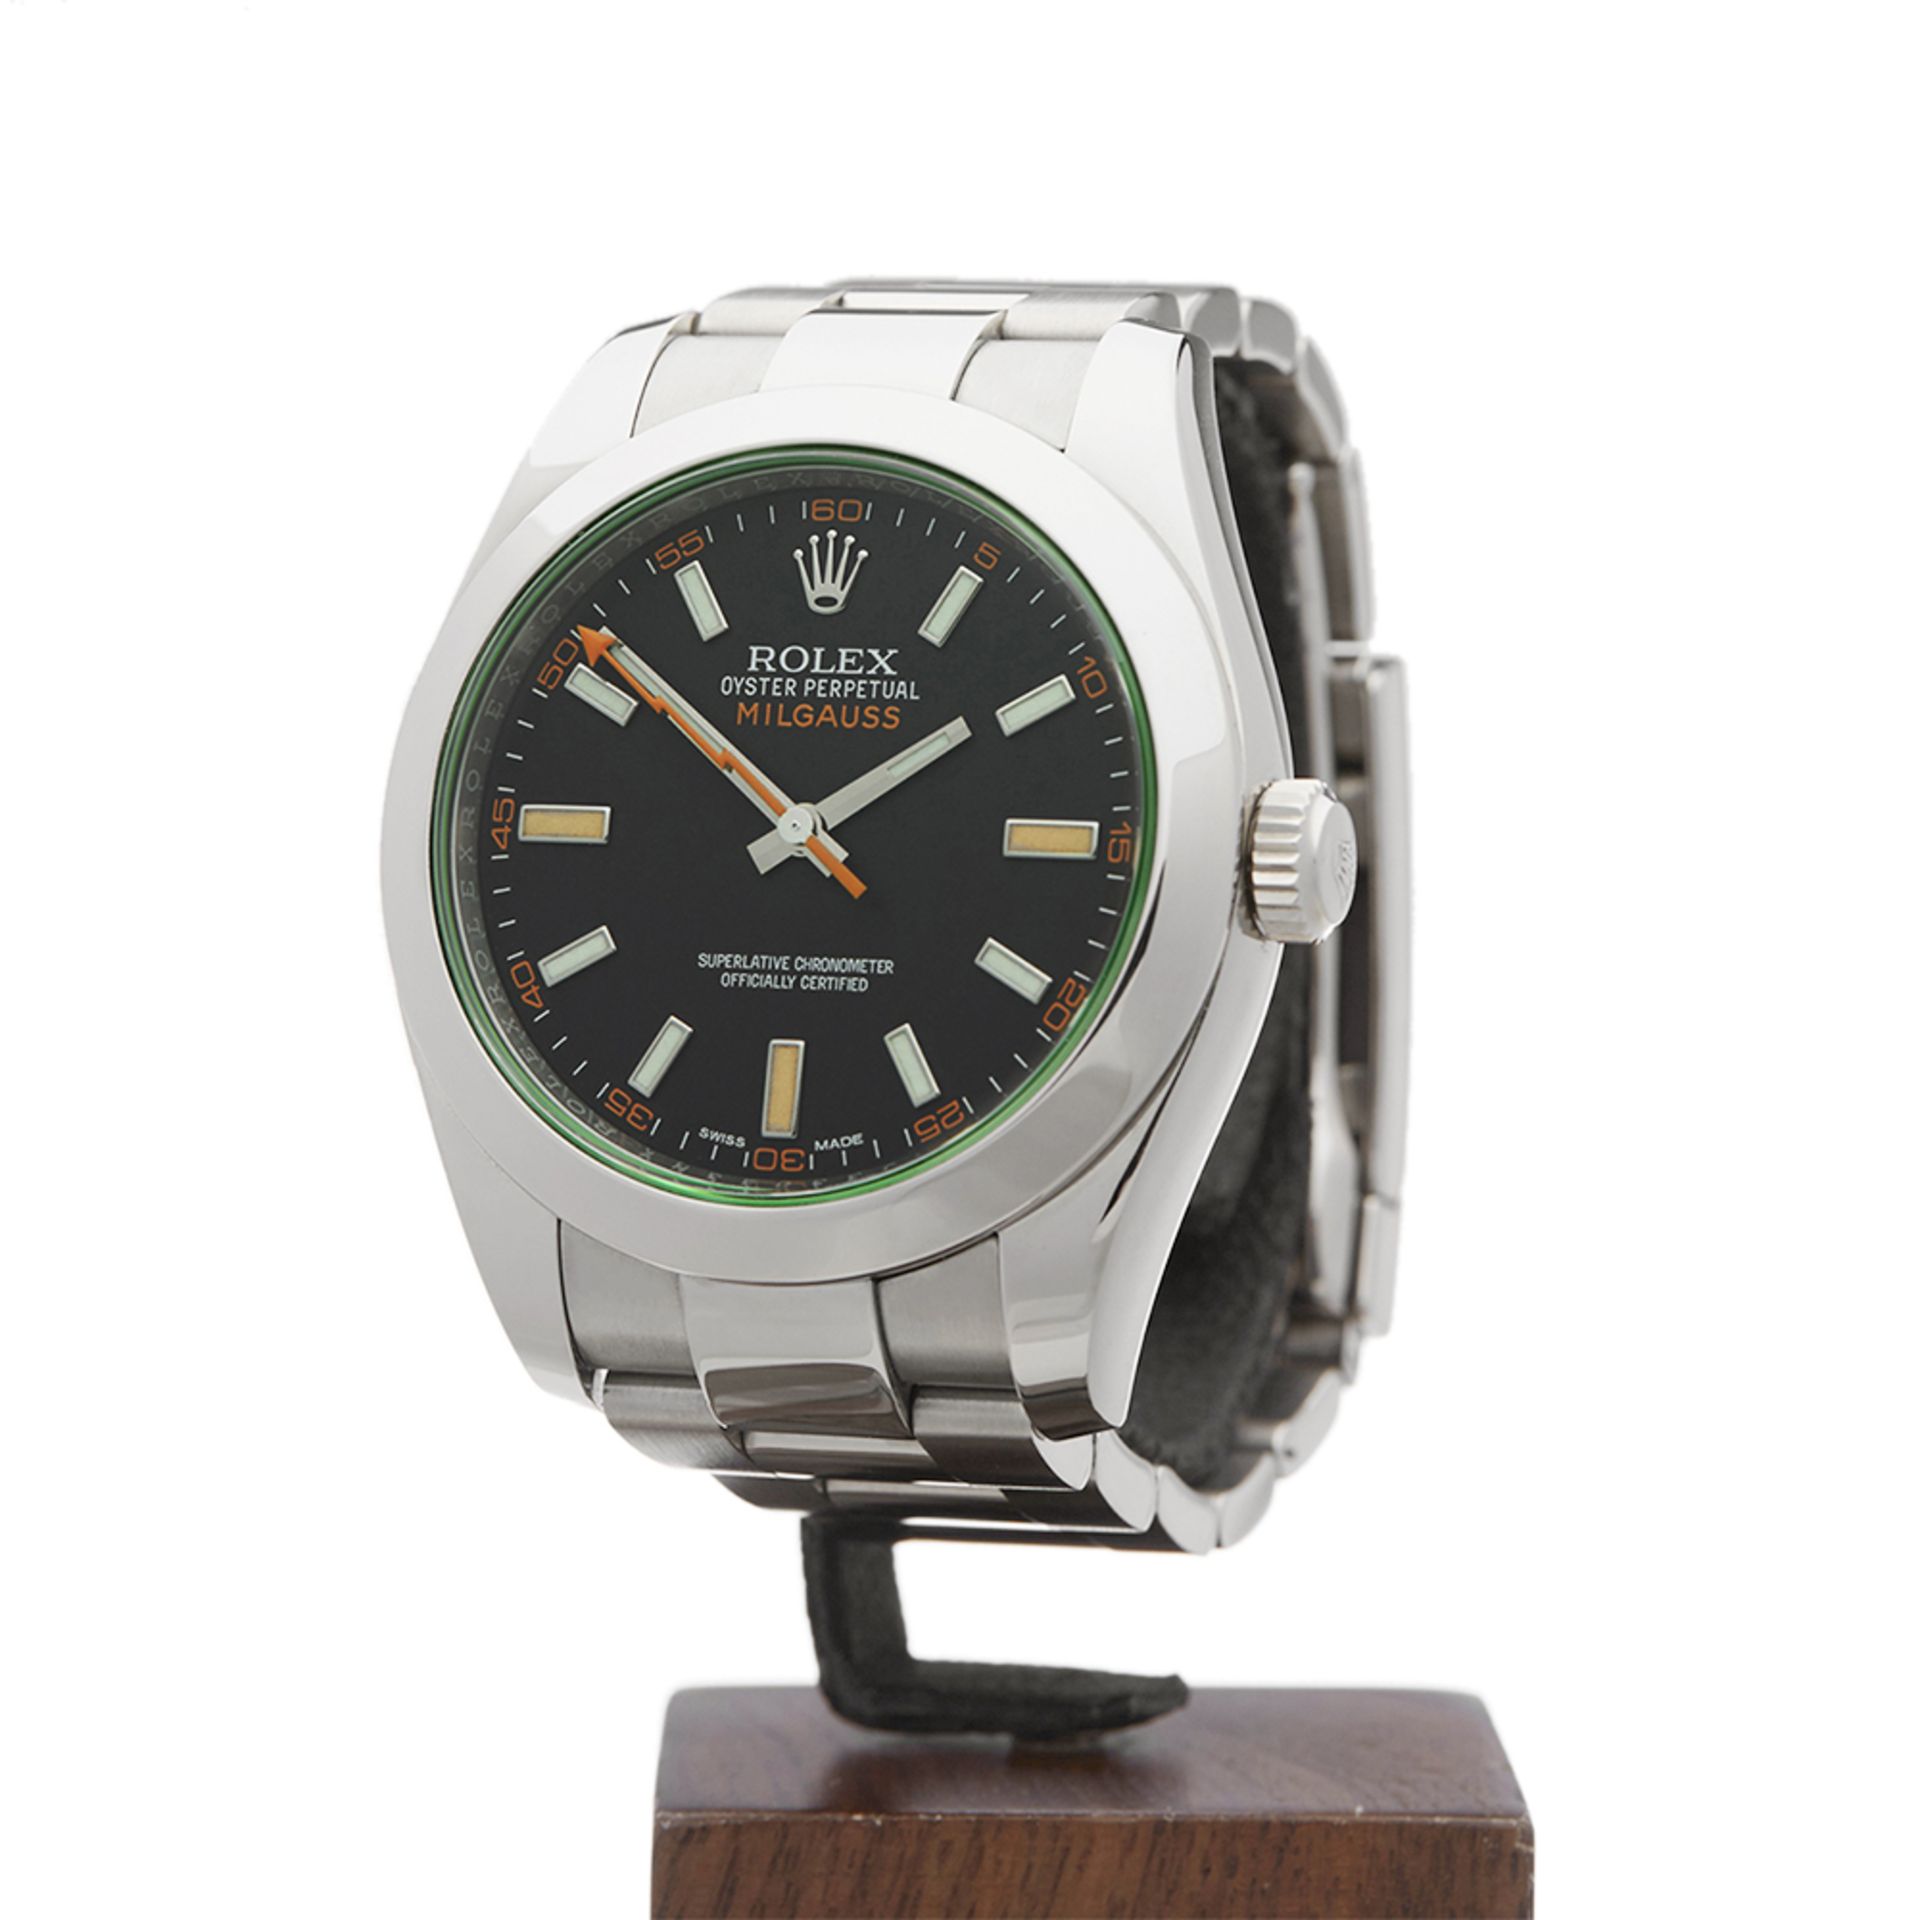 Rolex Milgauss Green Glass 40mm Stainless Steel - 116400GV - Image 2 of 8